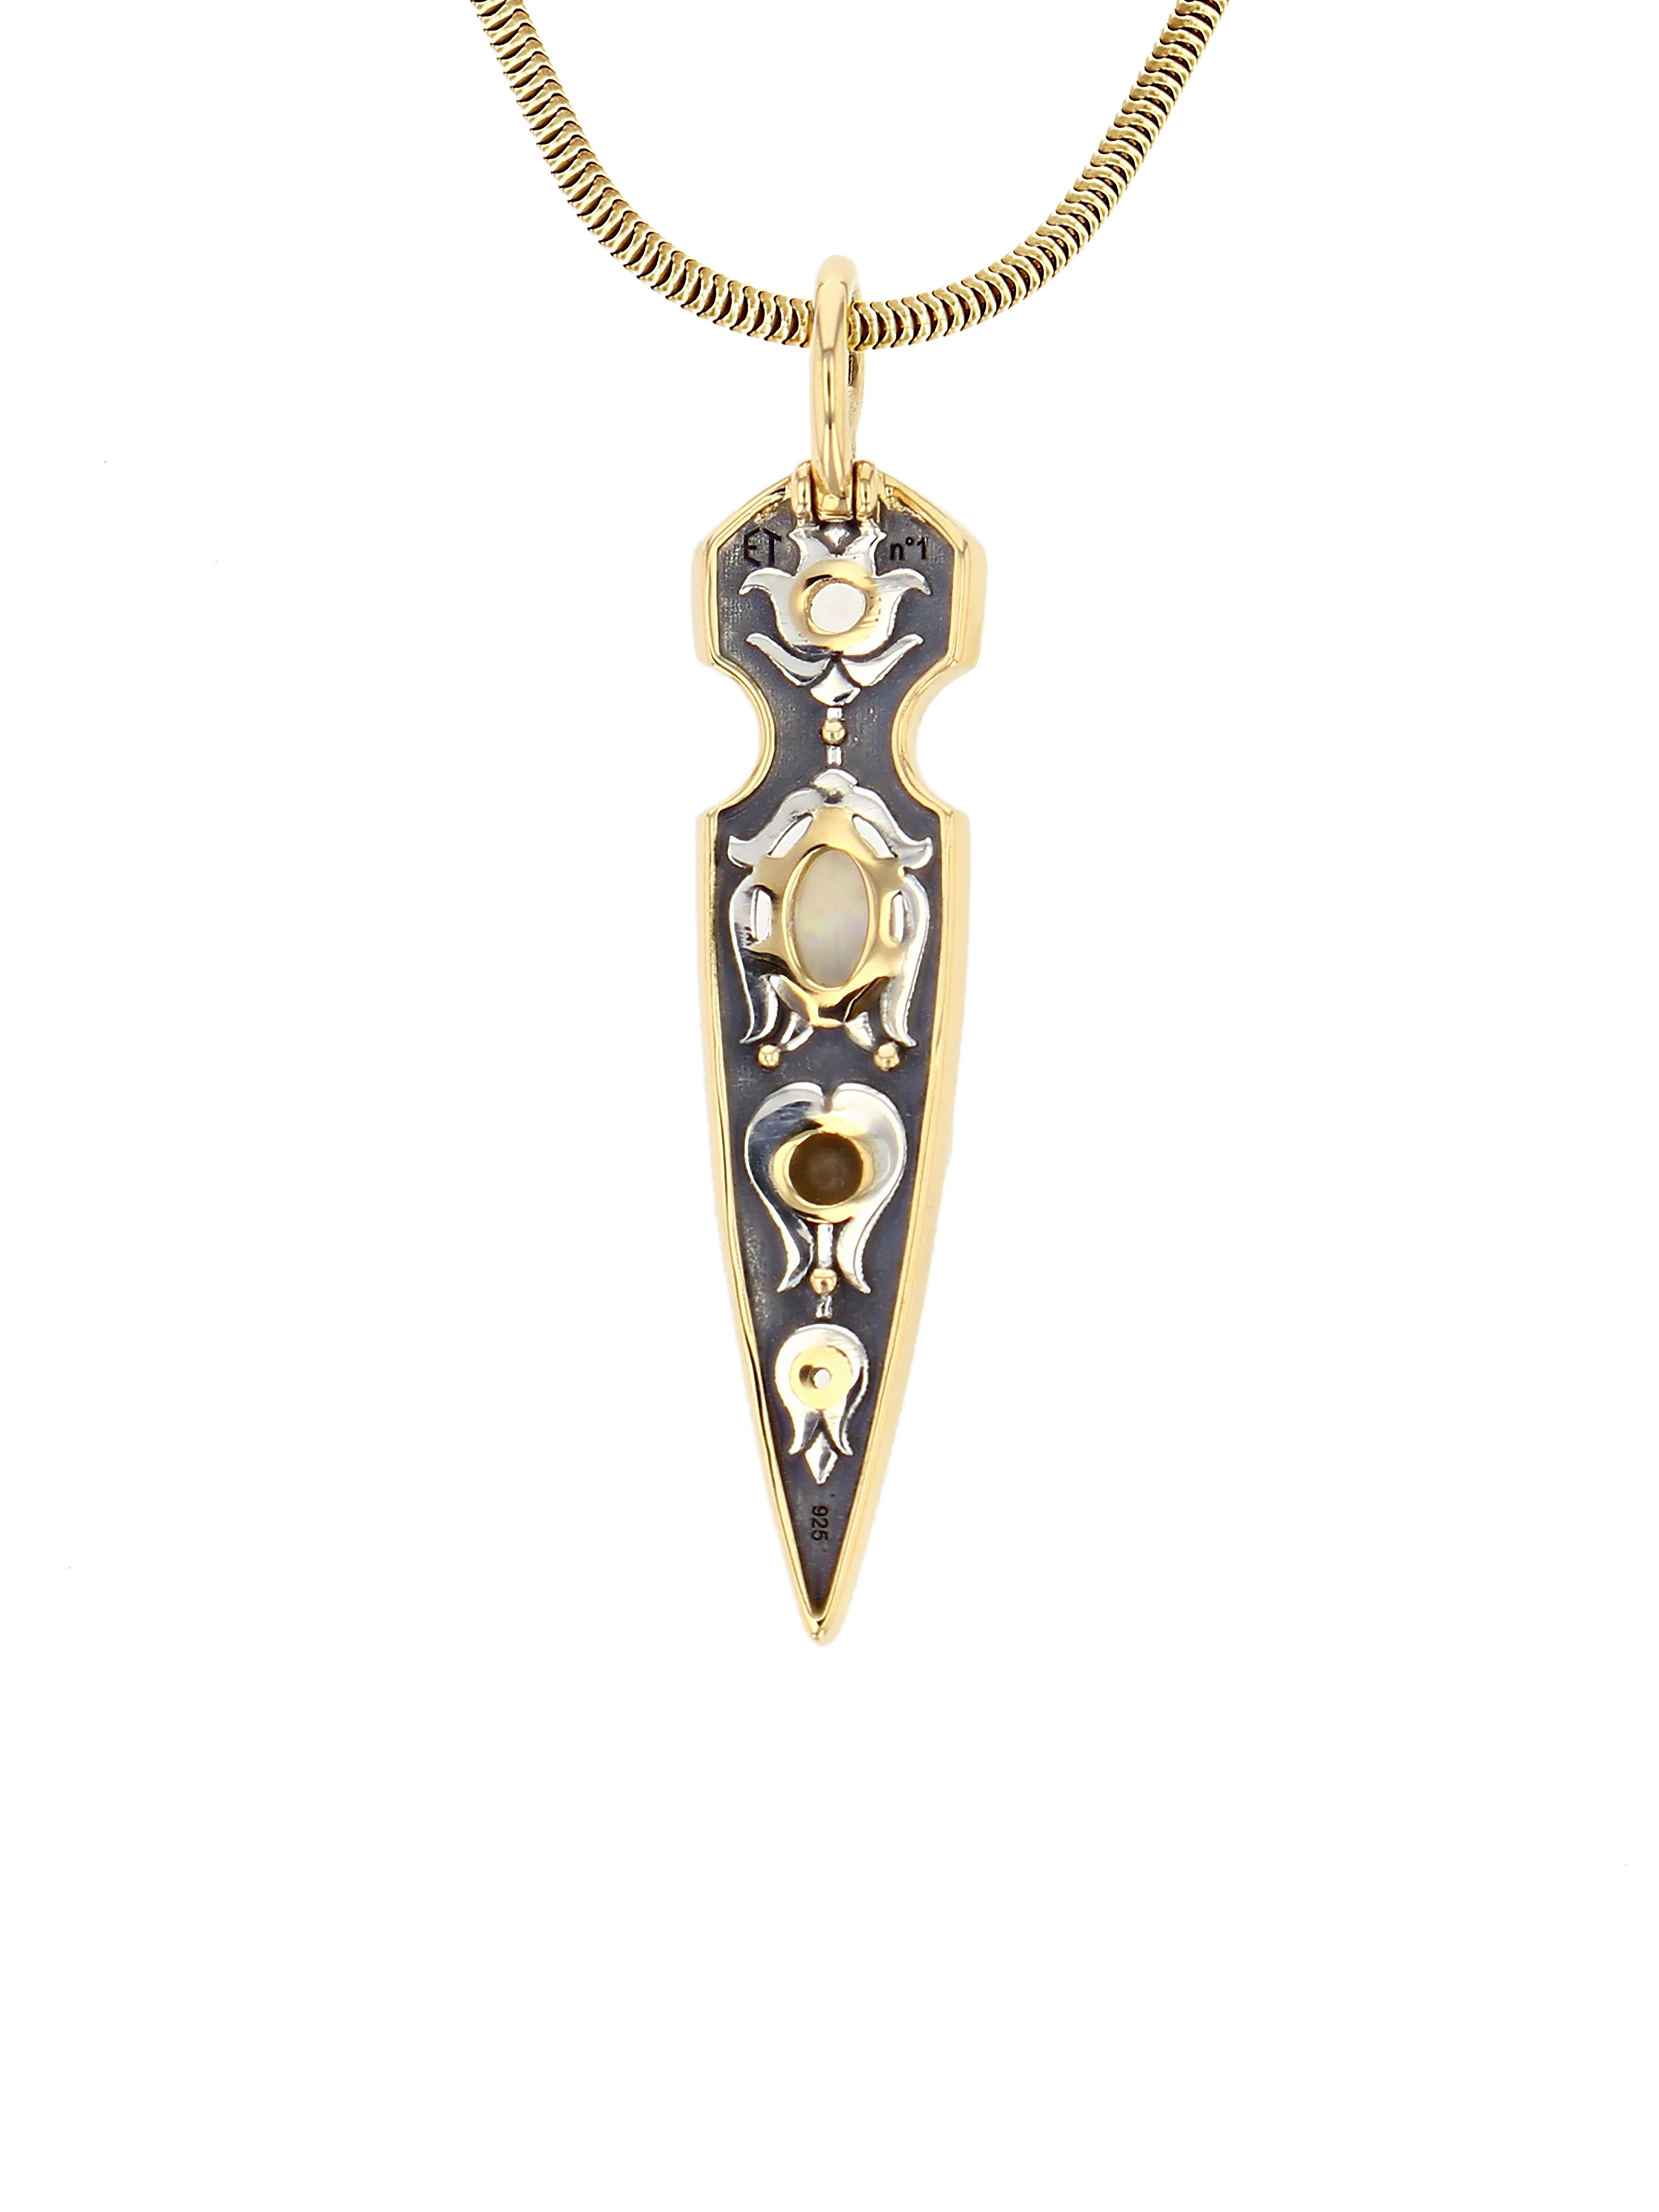 Yellow gold and distressed silver pendant,  studded with opal, akoya pearls and white topazes.

Details:
Opal, Topaz et Akoya Pearls
18k Yellow Gold: 7.6 g
Distressed Silver: 2 g
Made in France
